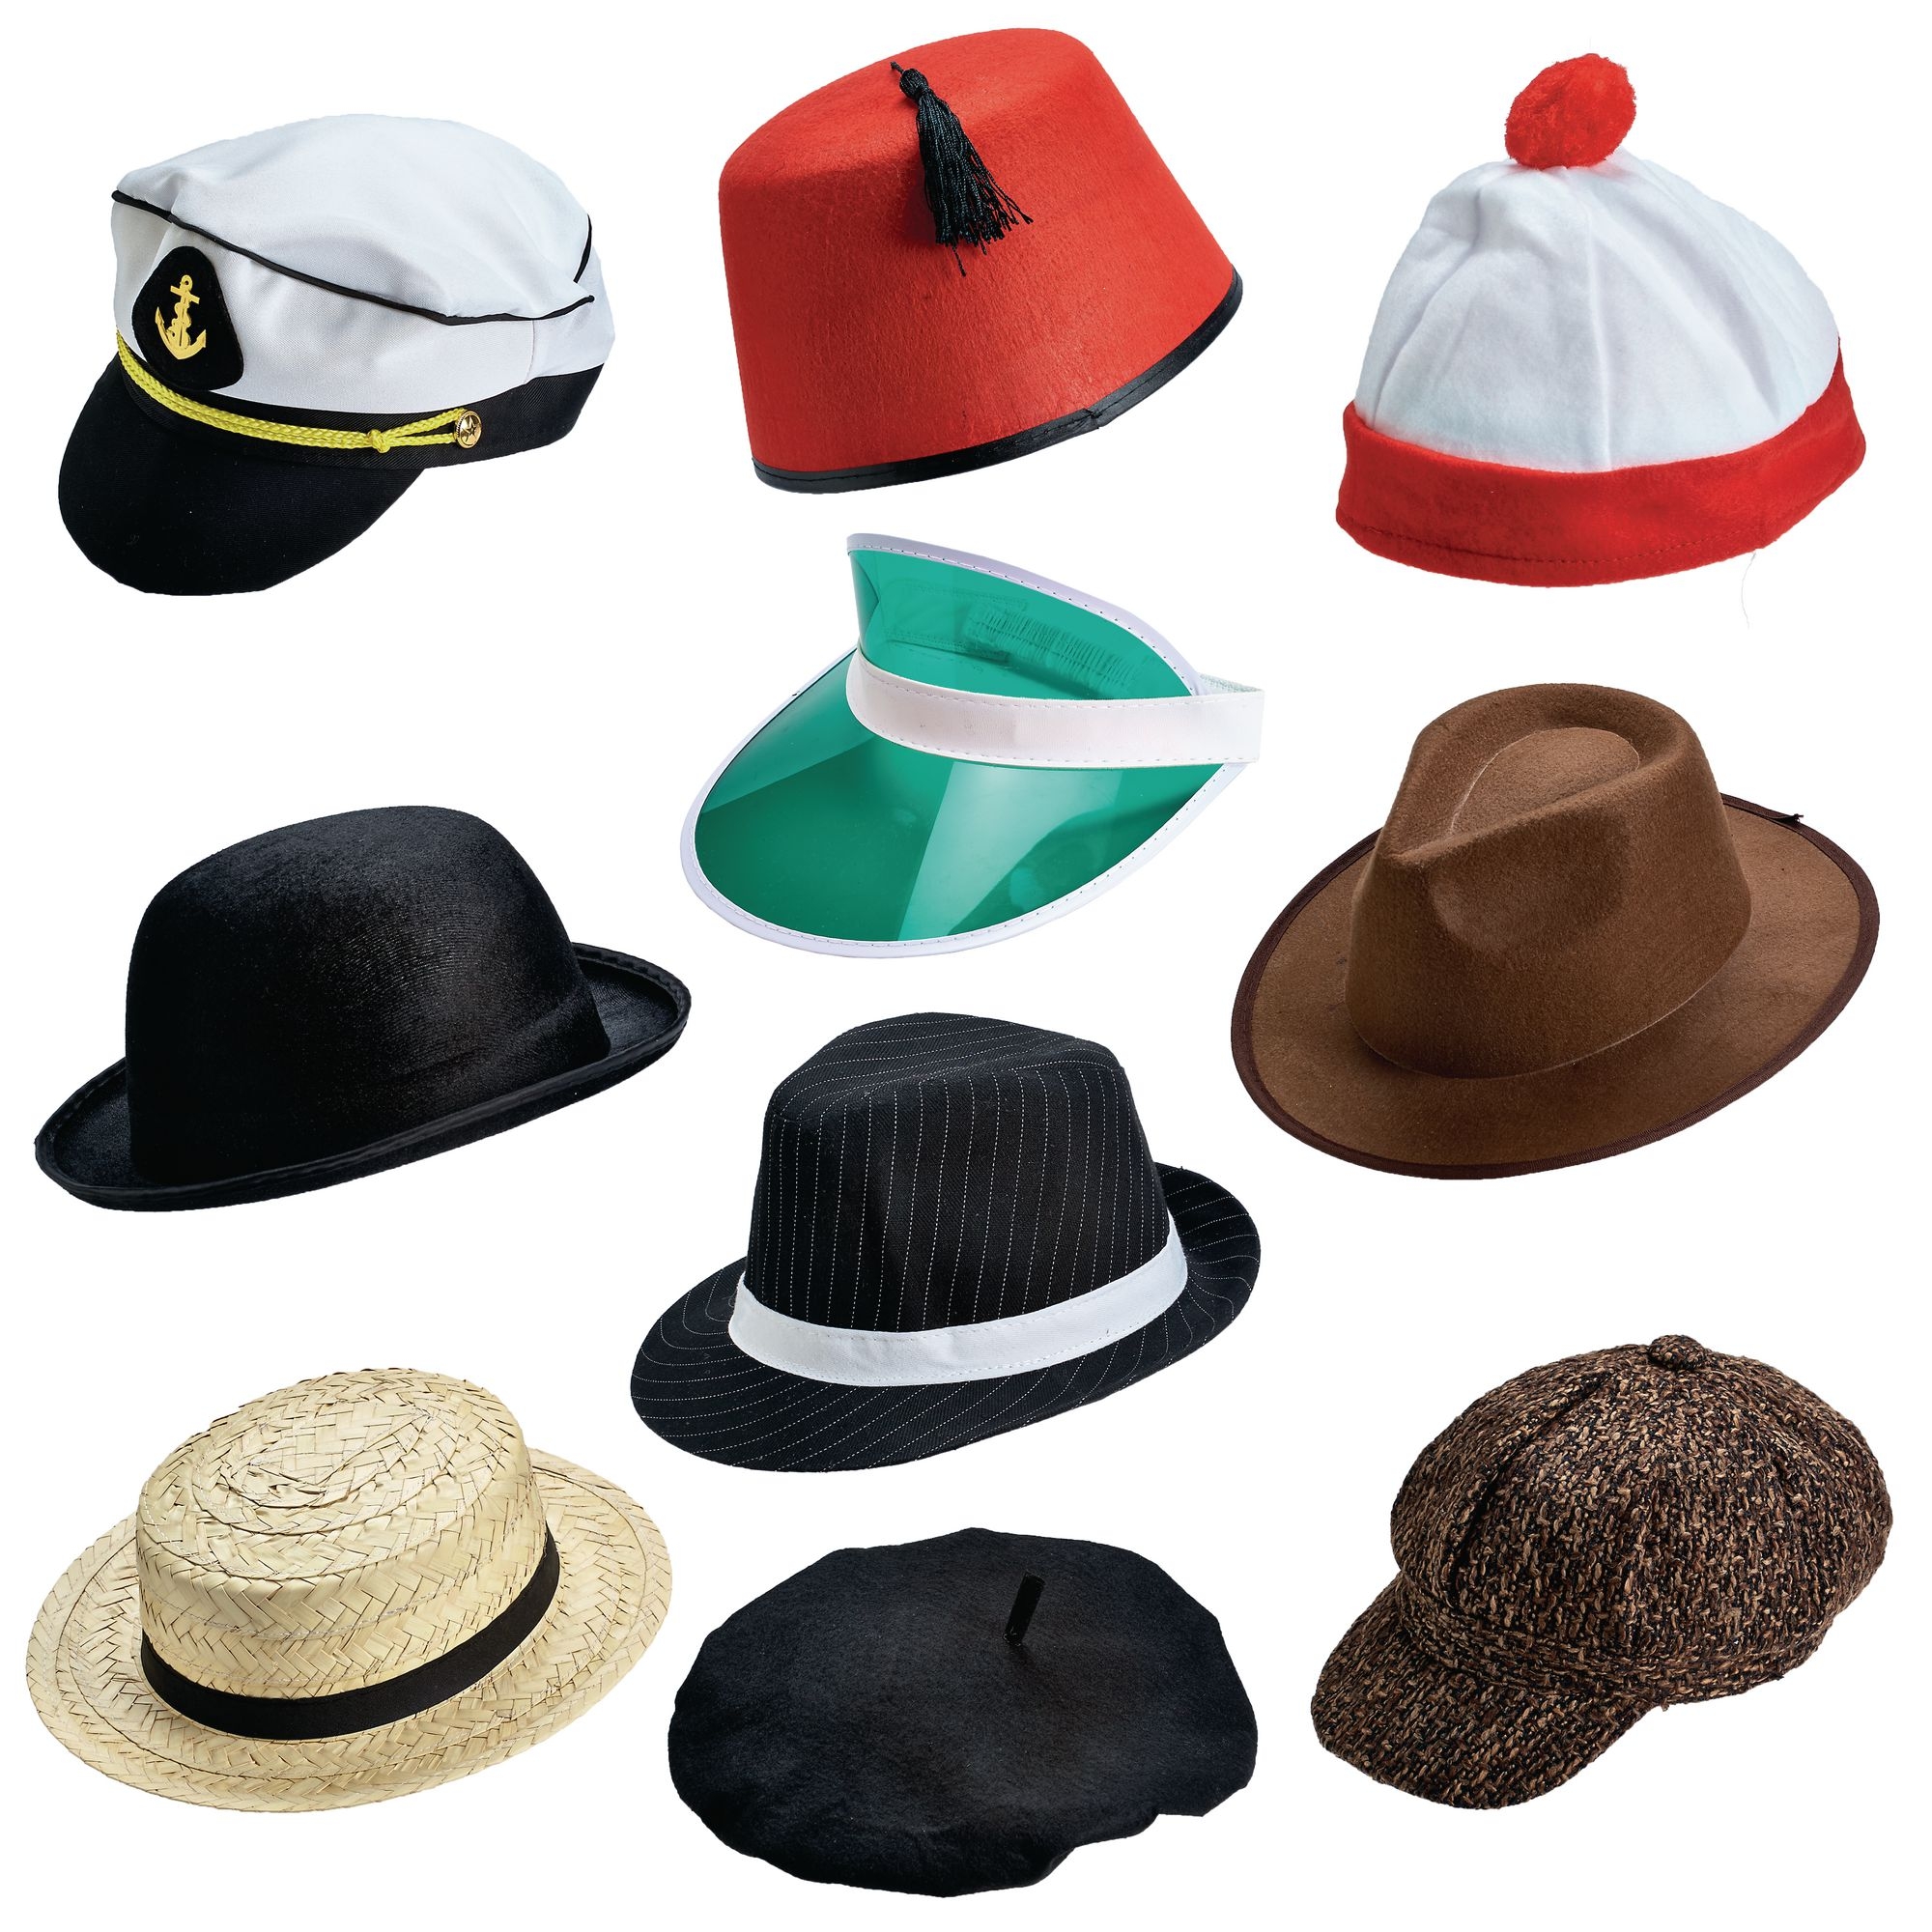 Fun Hats and Accessories